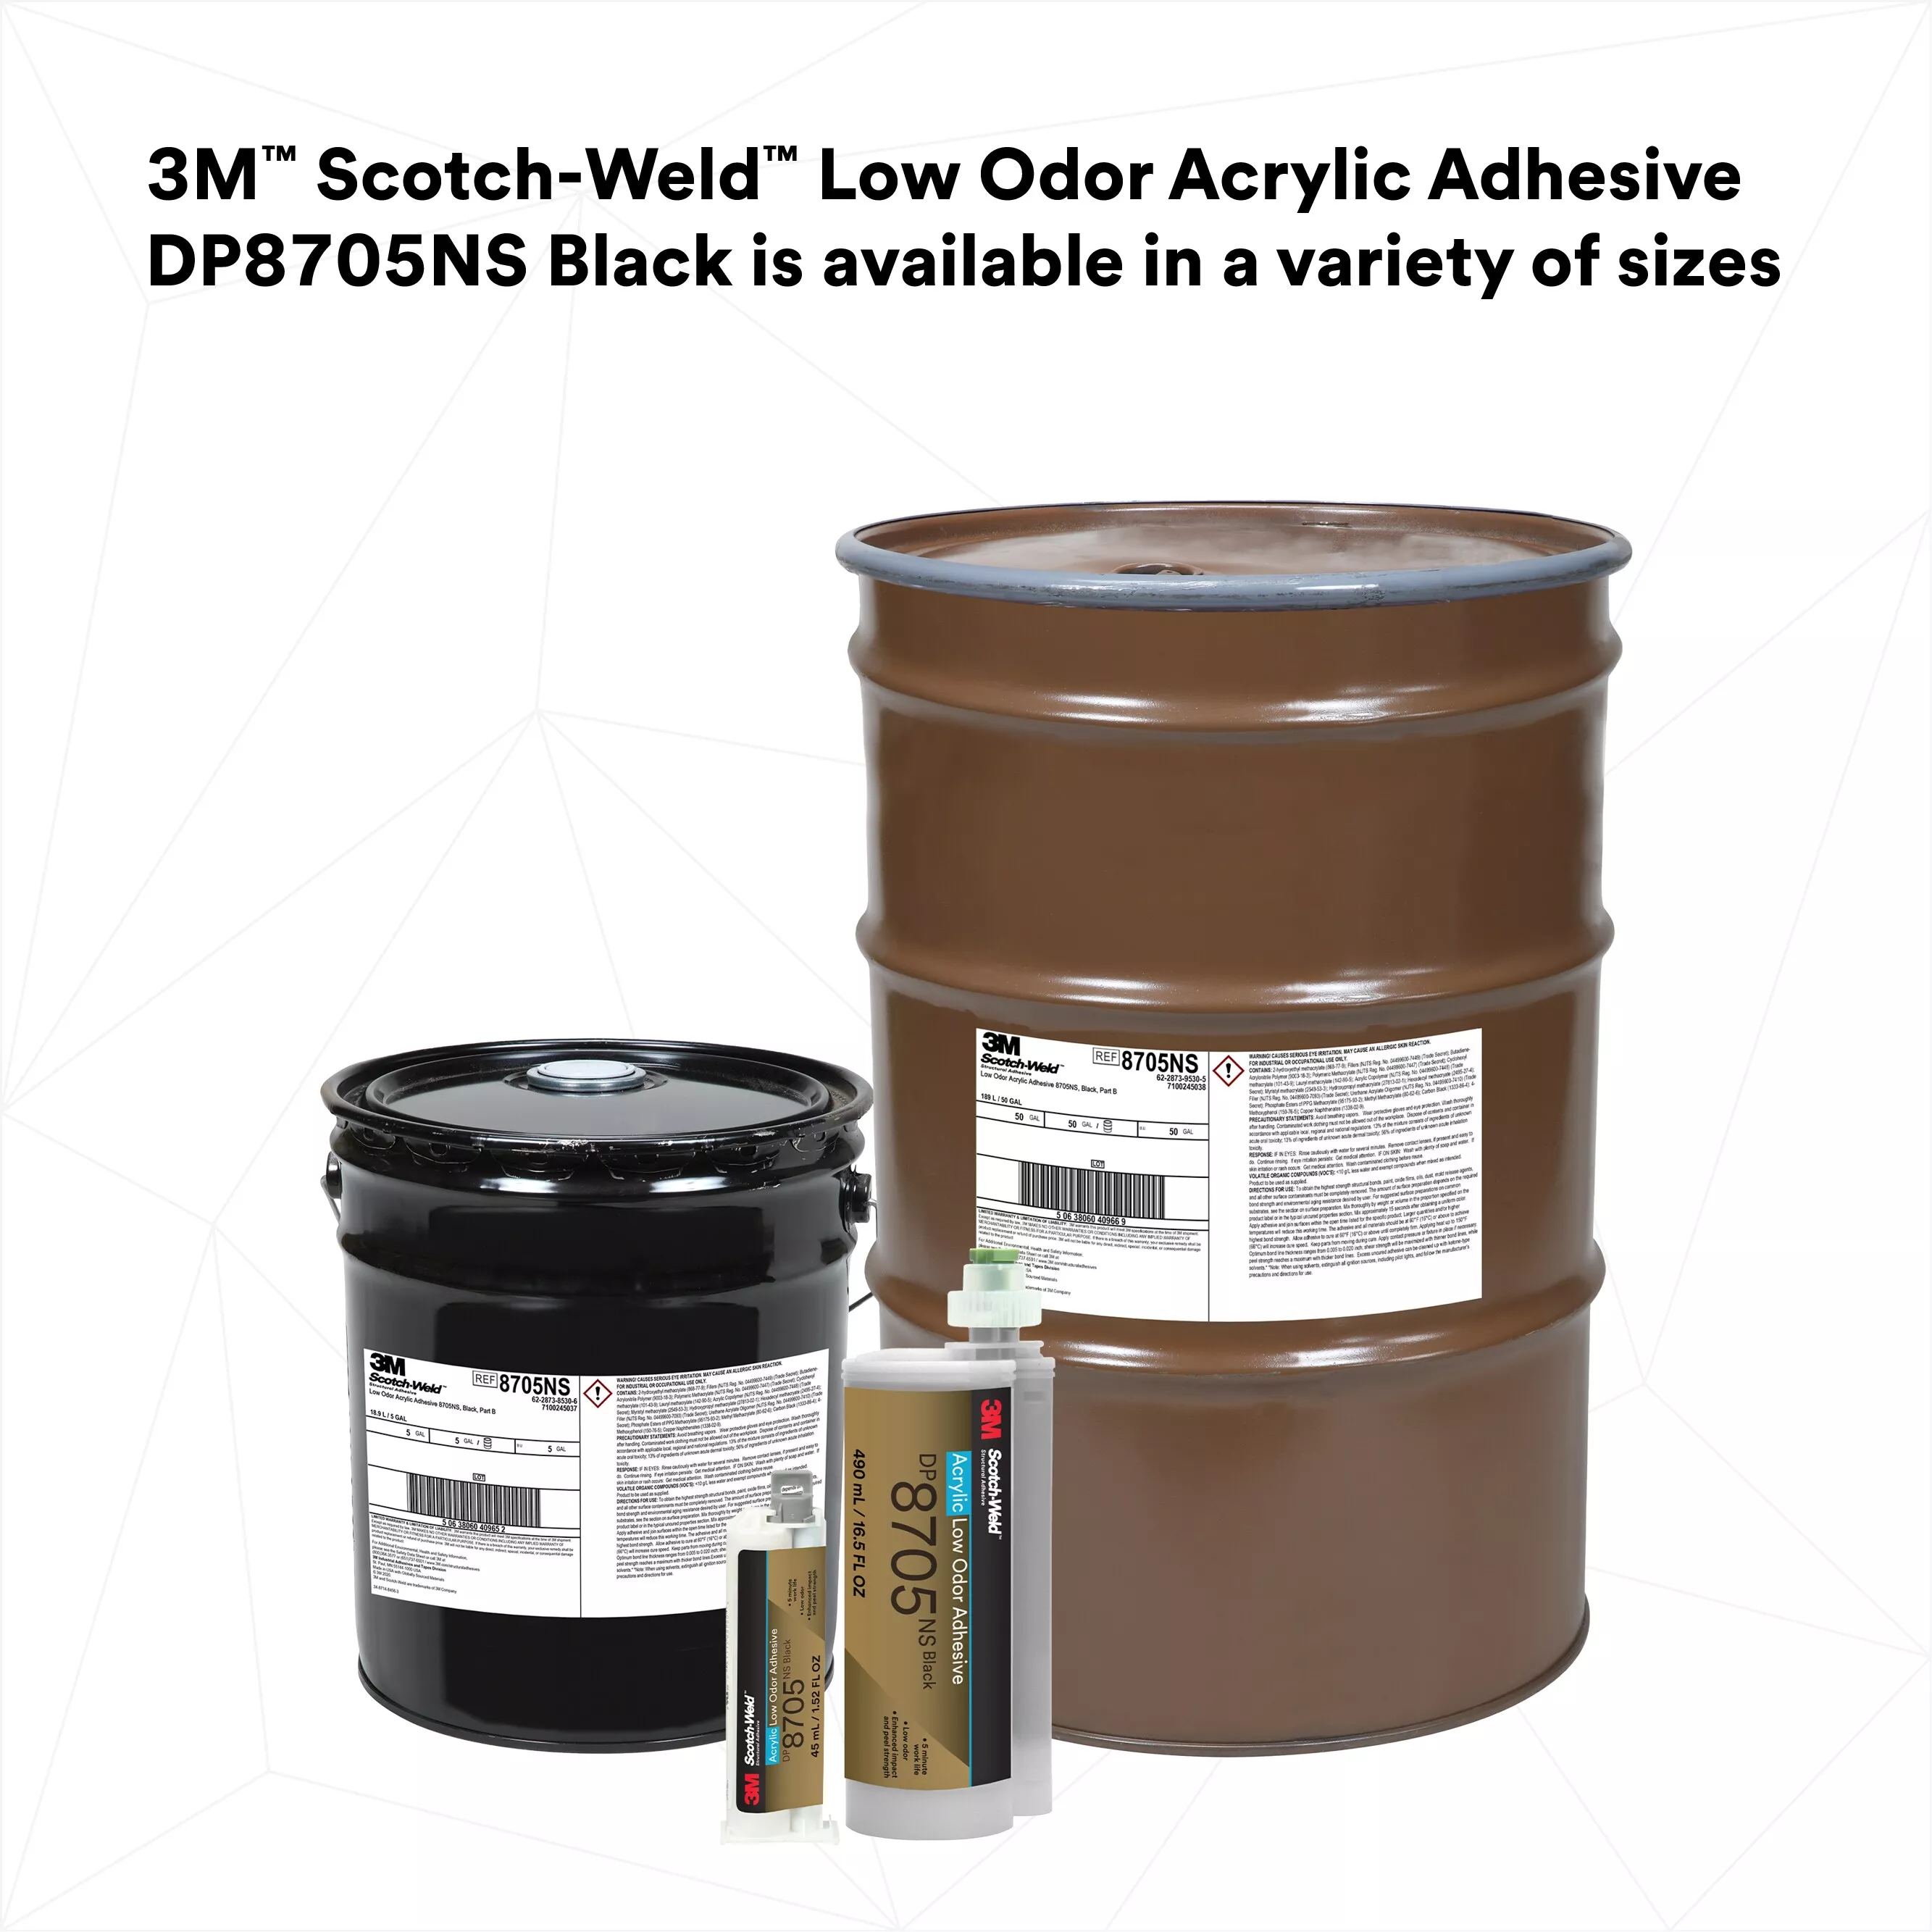 Product Number DP8705NS | 3M™ Scotch-Weld™ Low Odor Acrylic Adhesive DP8705NS